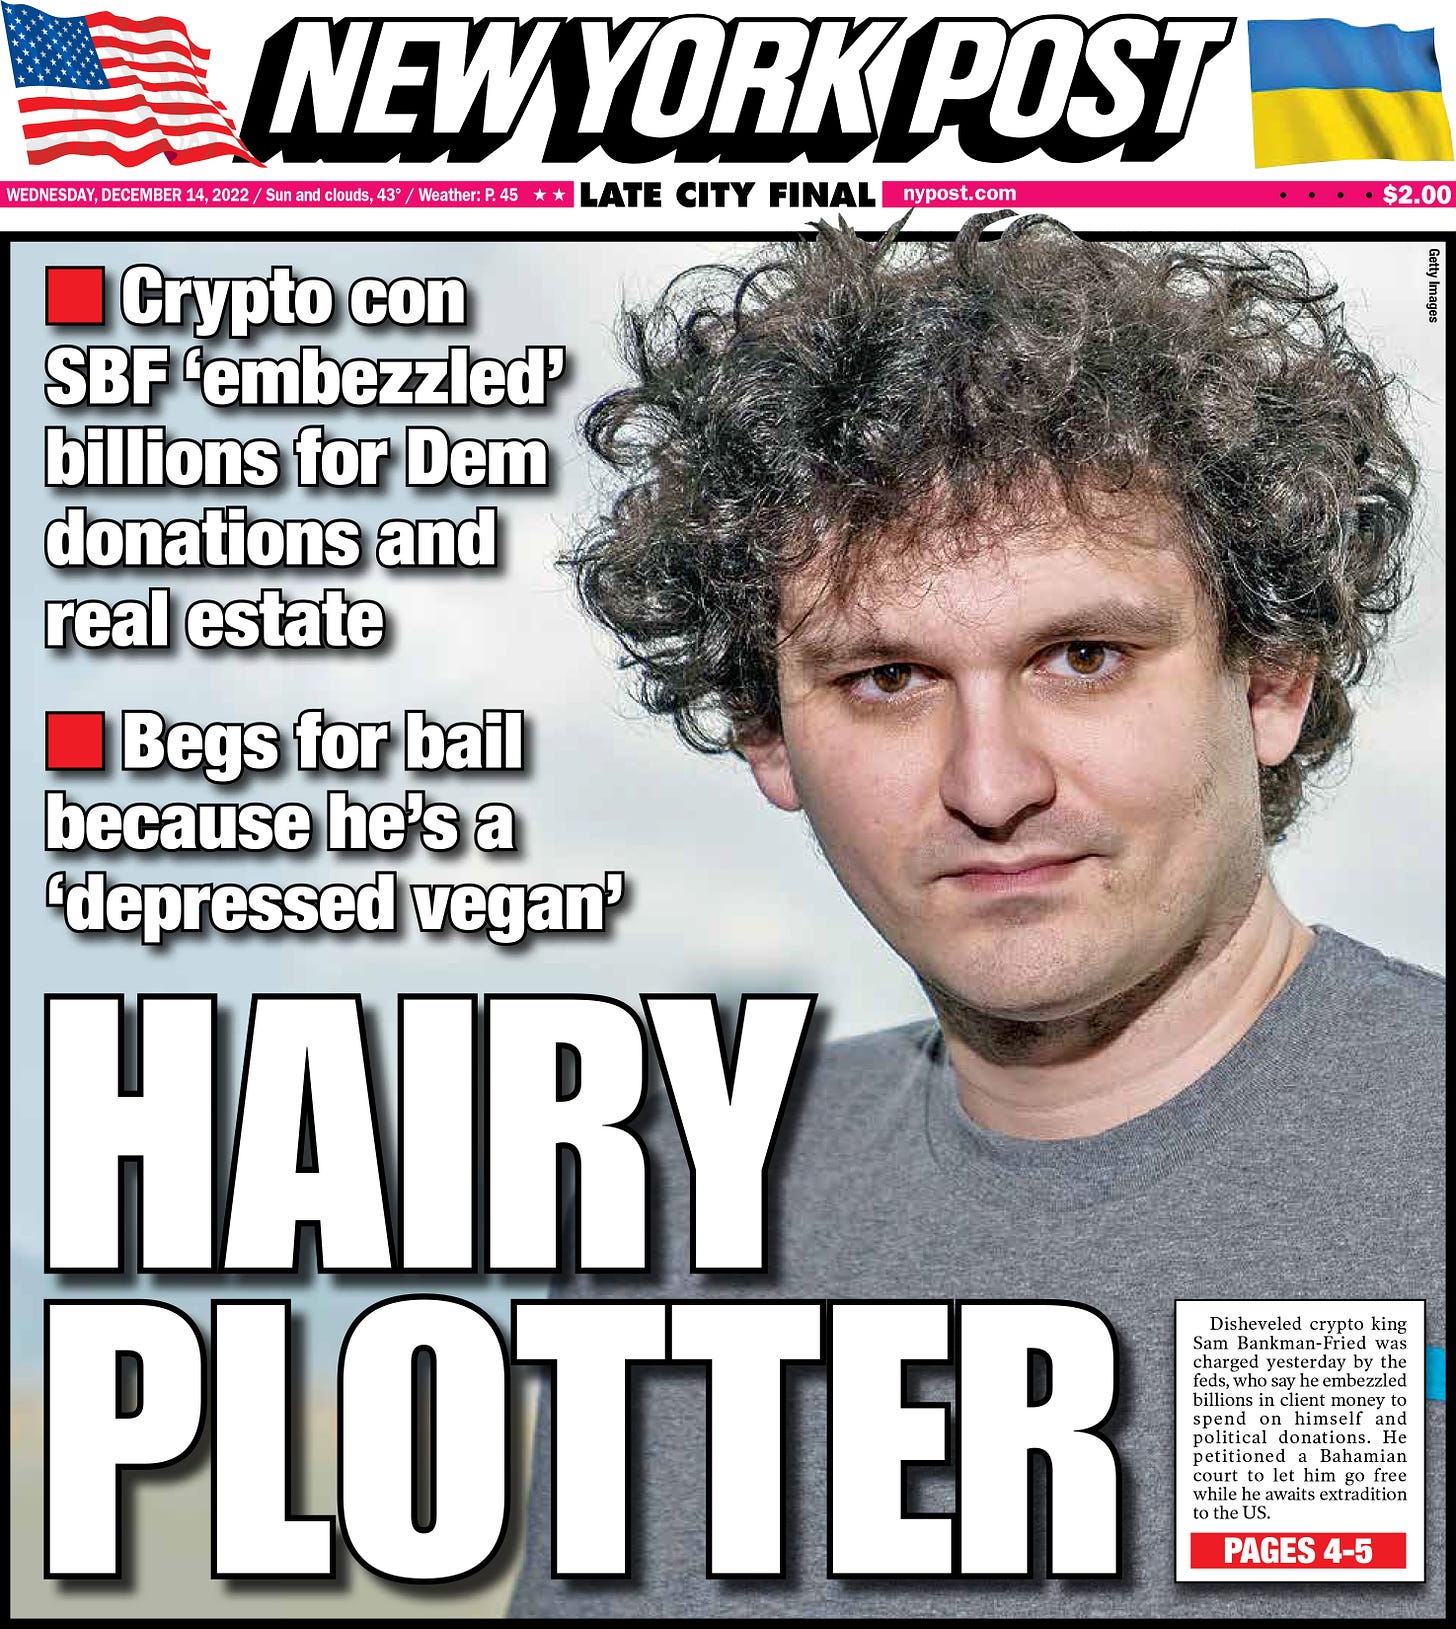 Cover of the NY Post for 12/14, with a picture of Sam Bankman-Fried looking disheveled and the headline “HAIRY PLOTTER”